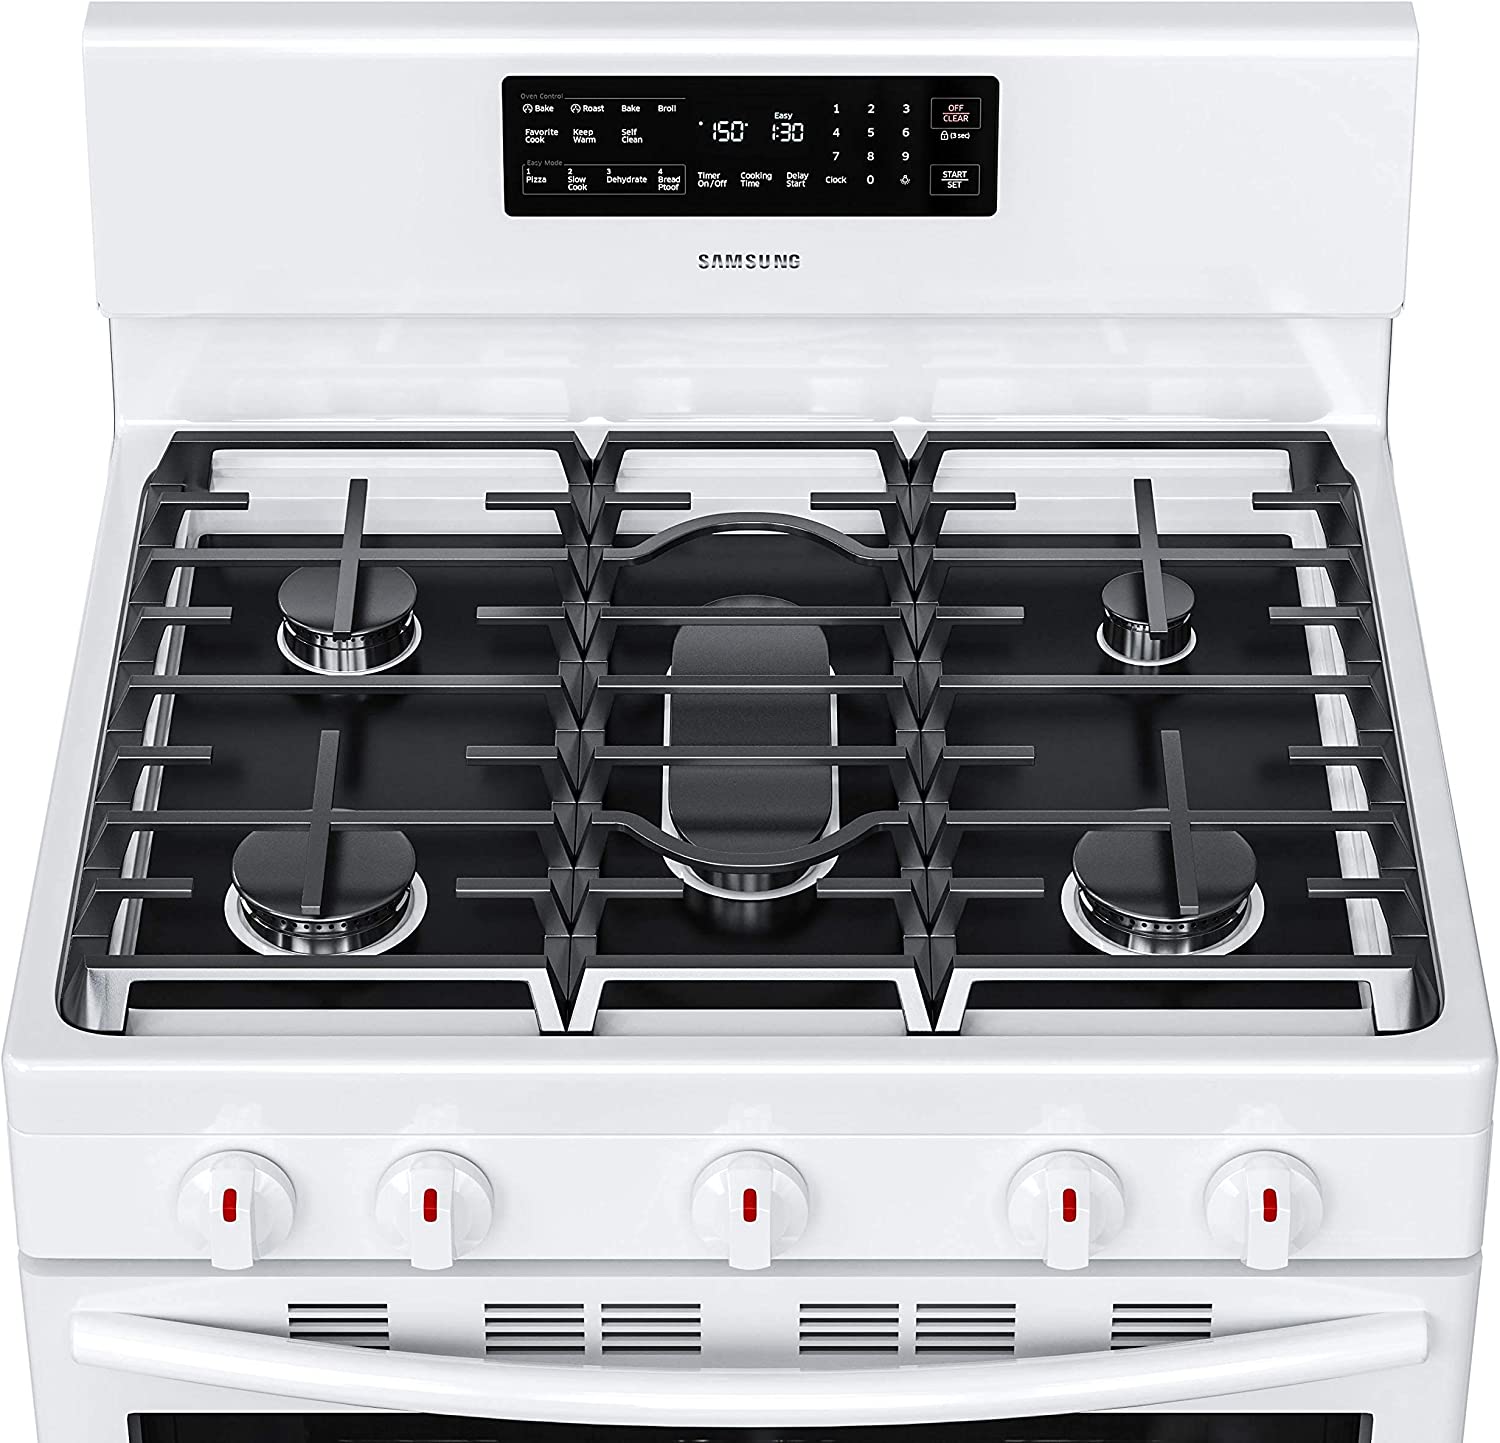  Skywin Stovetop Cover - Spill Guard Gas Range